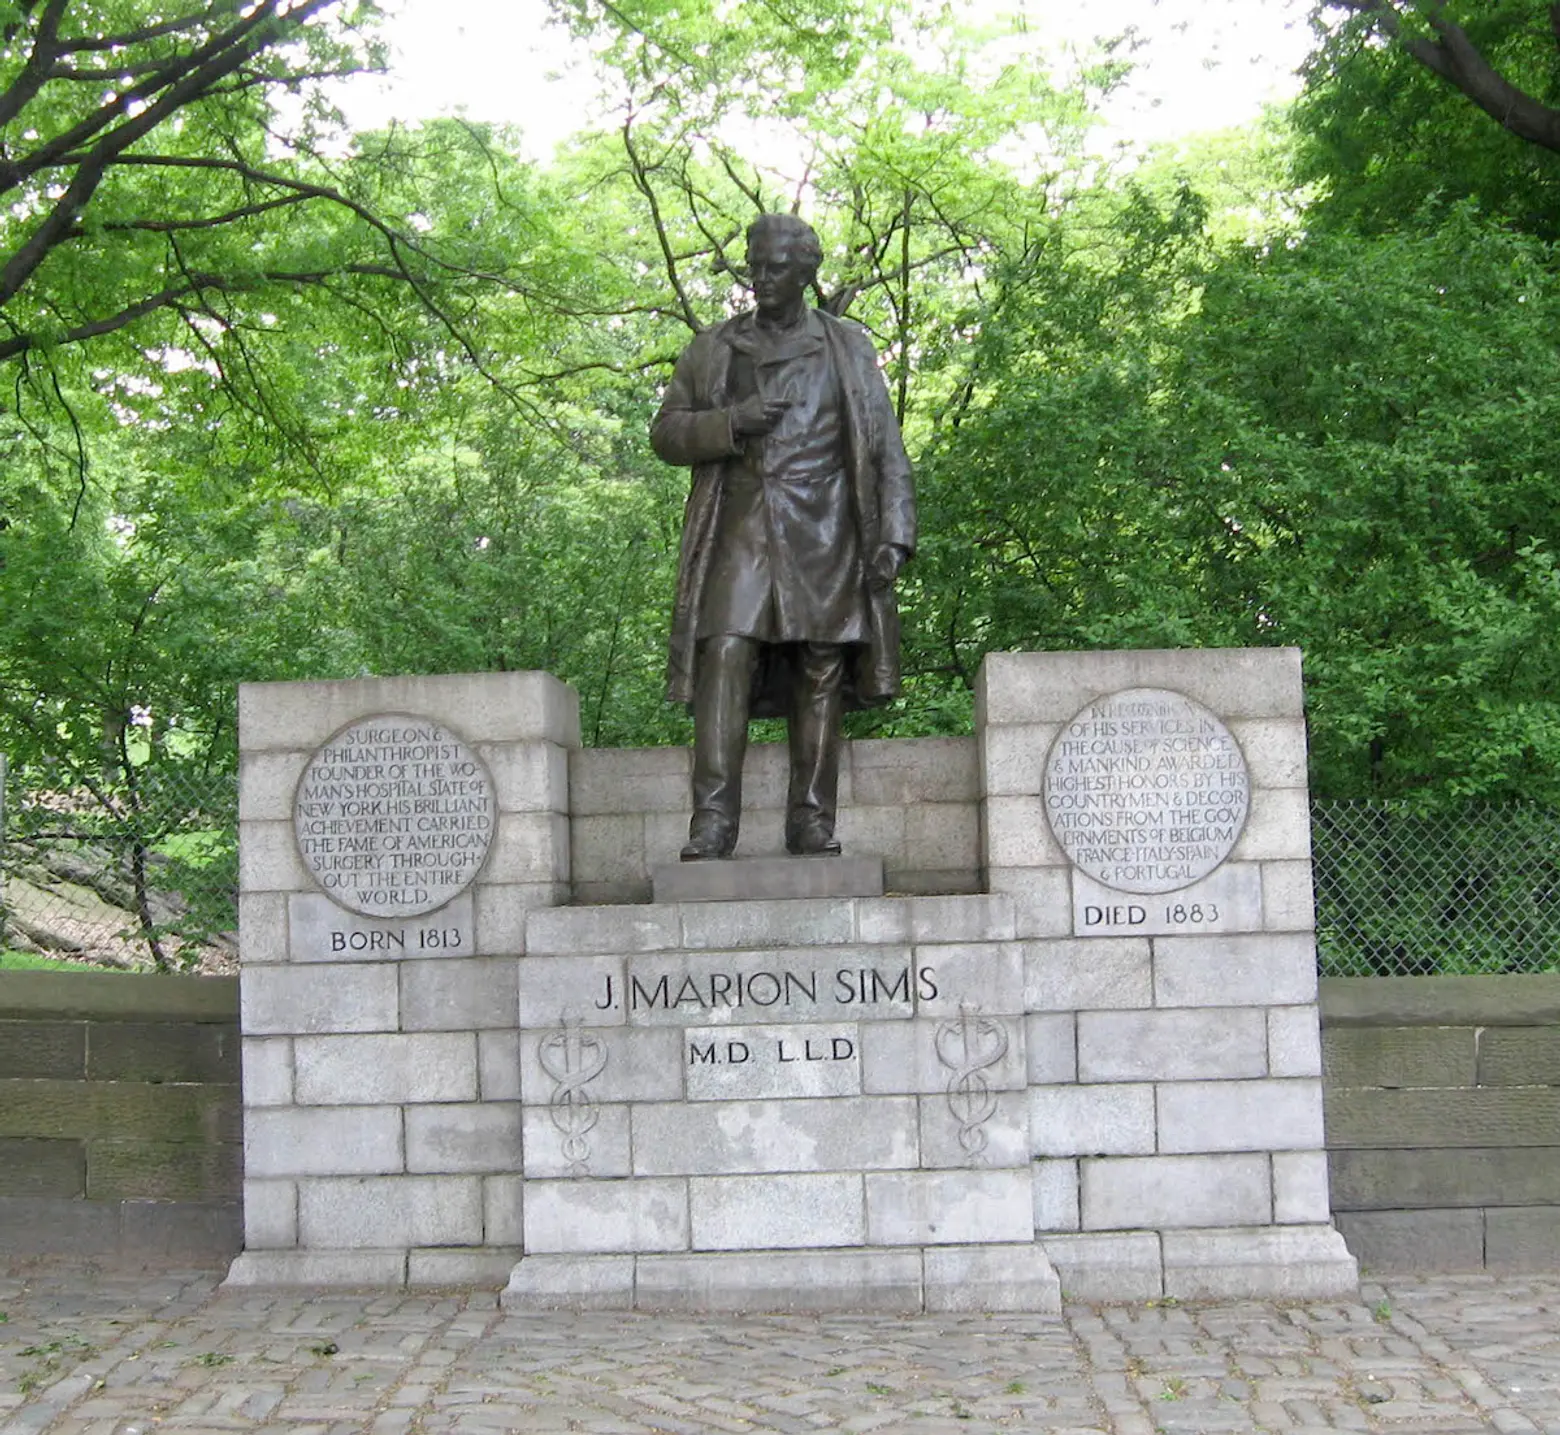 City orders Central Park statue of ‘hero’ M.D. who performed experiments on slaves be removed